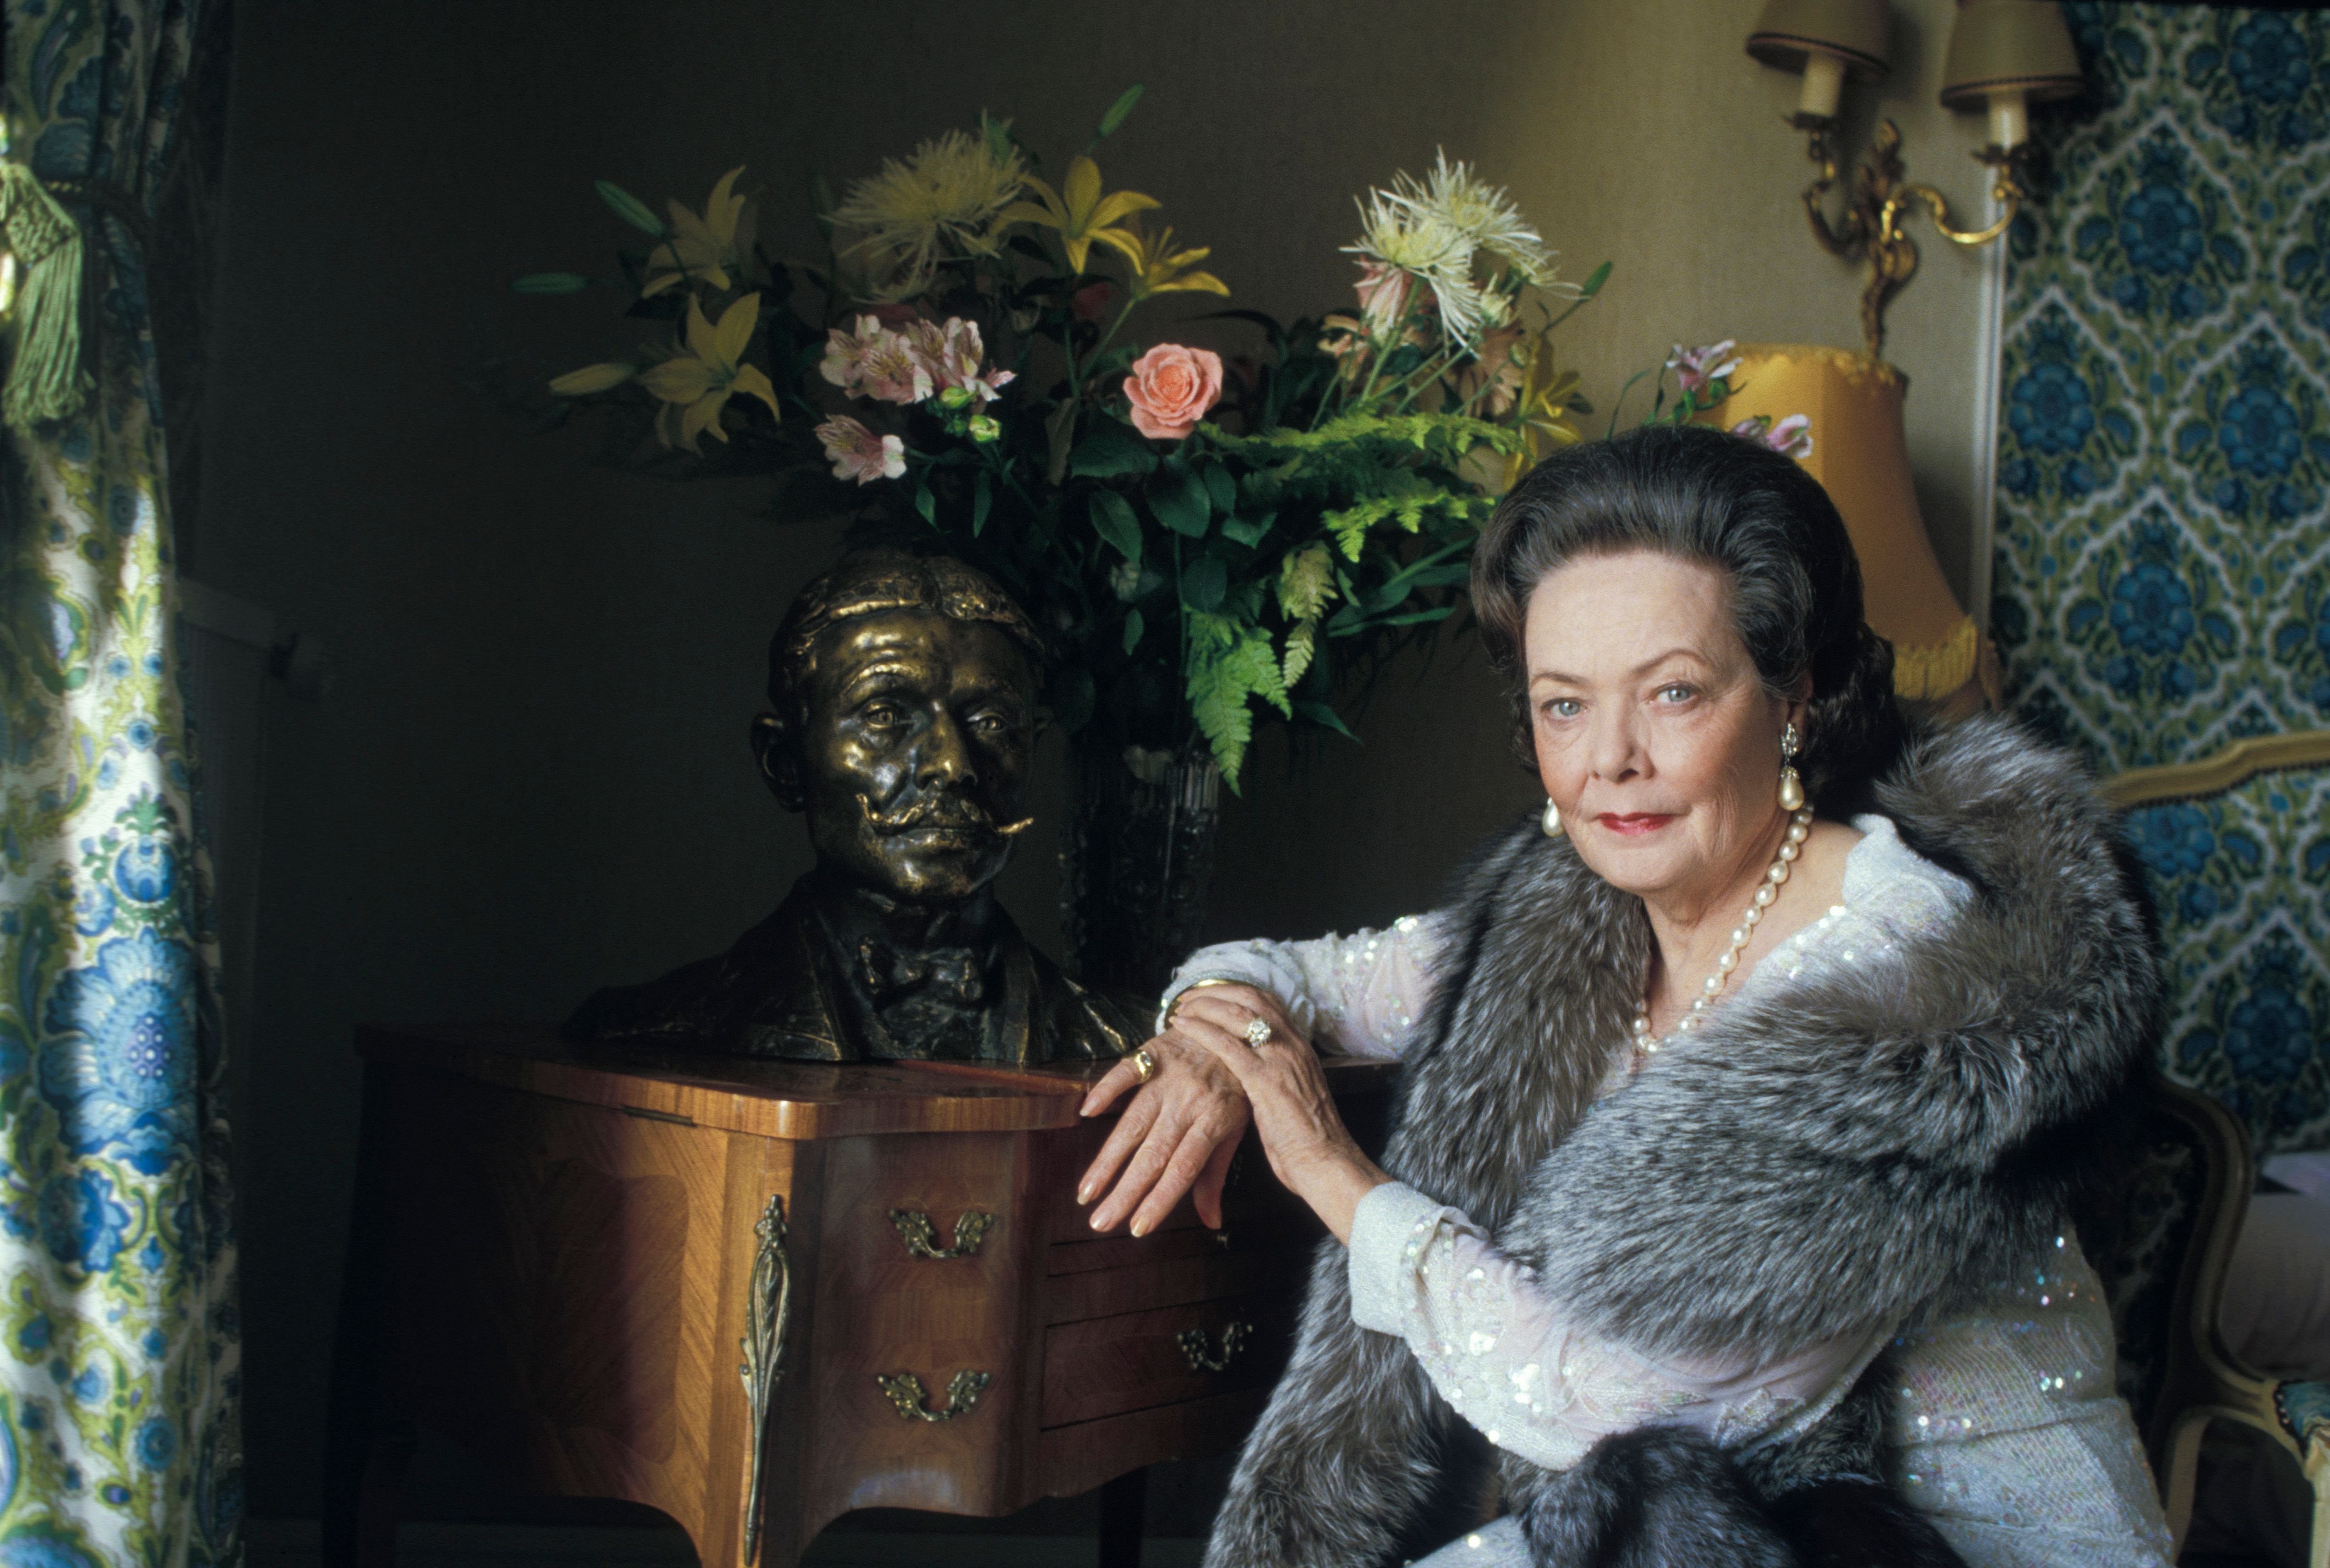  Gene Tierney at the Romantic Film Festival in 1986 in Cabourg, France | Source: Getty Images